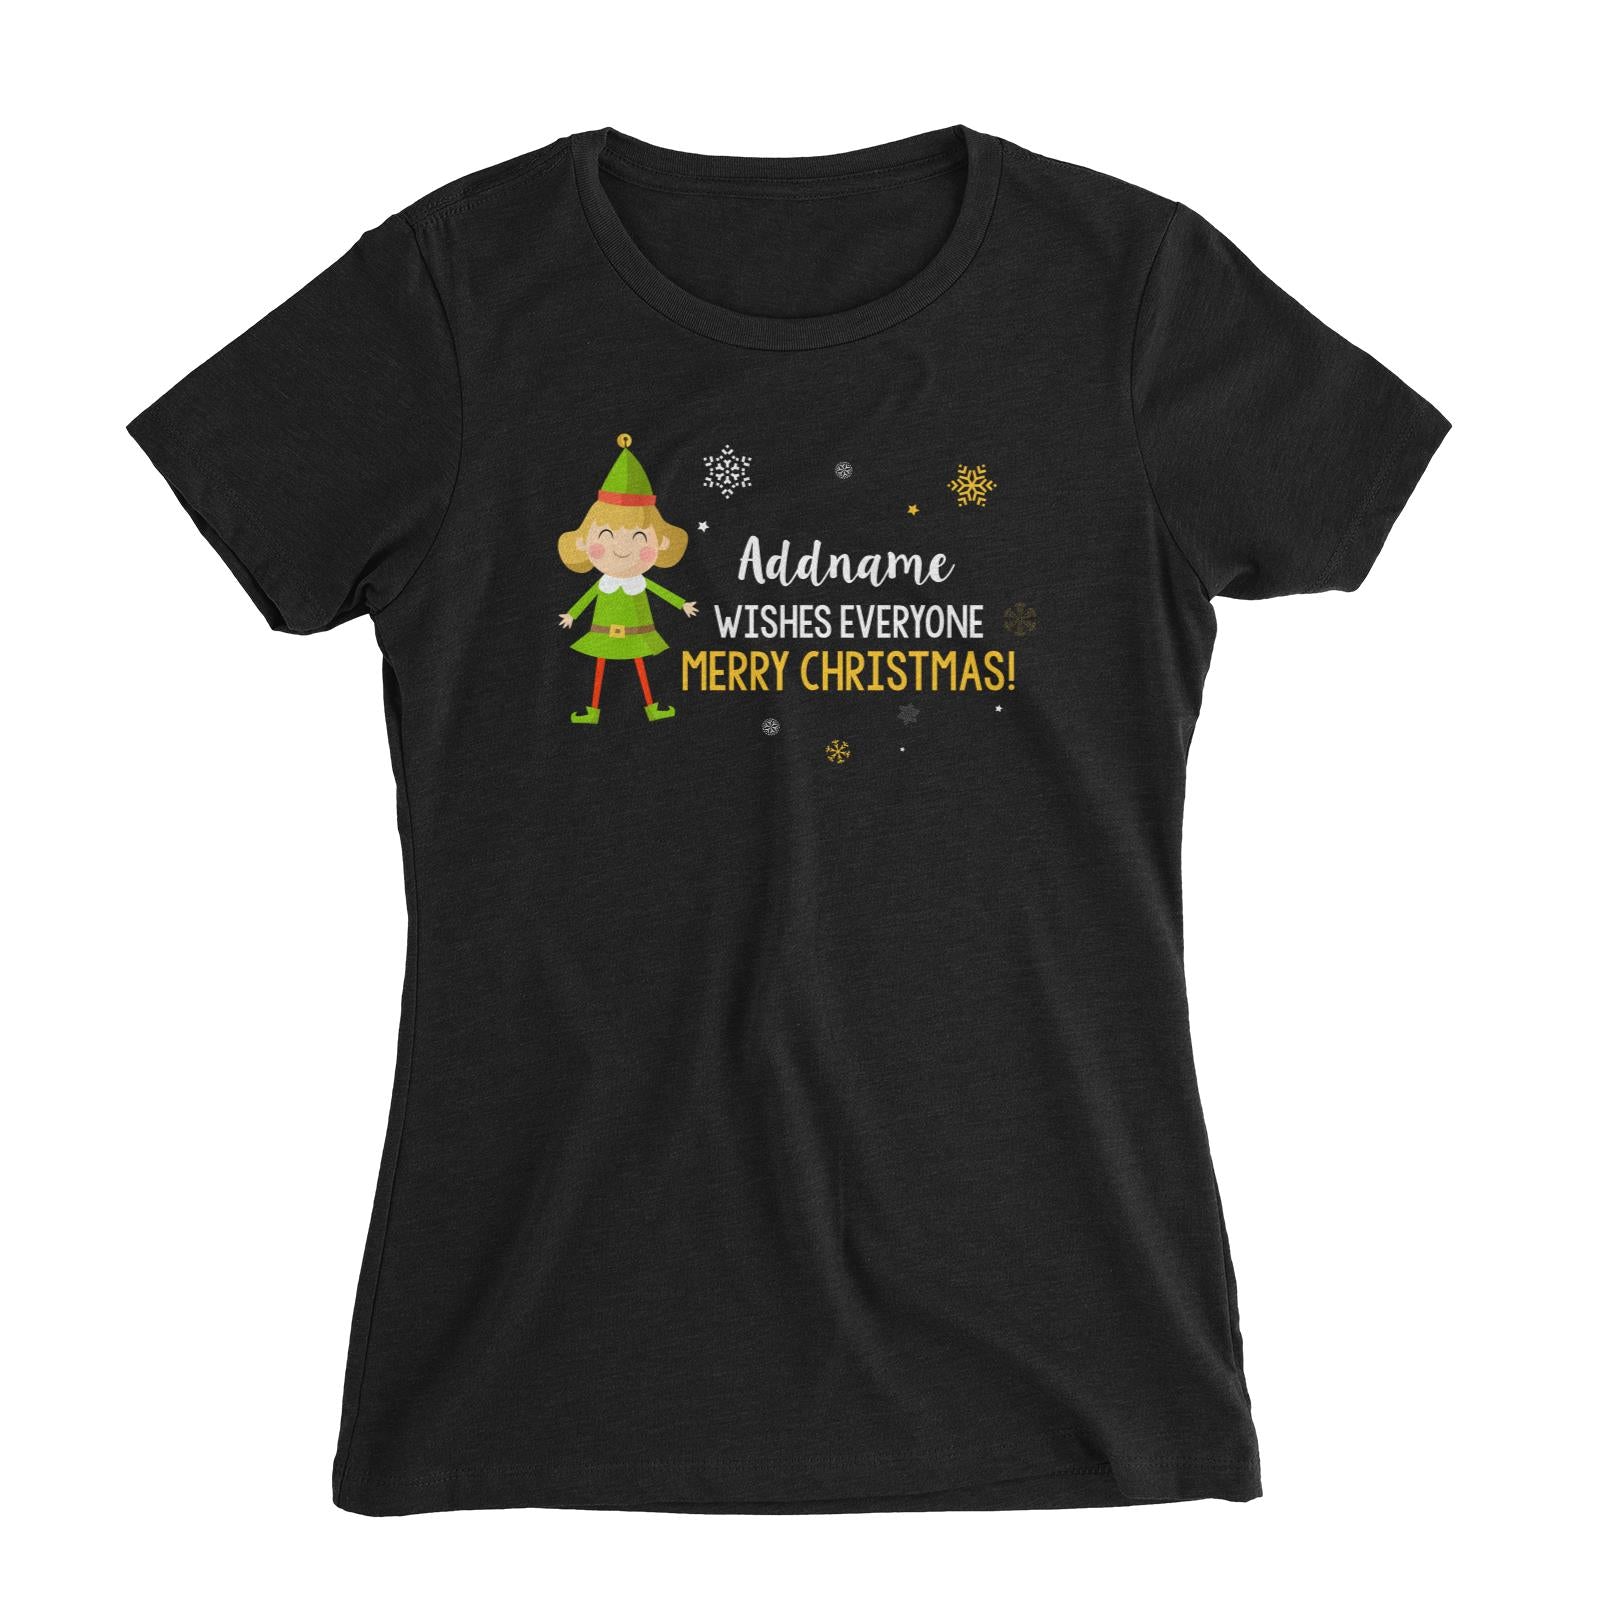 Cute Elf Woman Wishes Everyone Merry Christmas Addname Women's Slim Fit T-Shirt  Matching Family Personalizable Designs